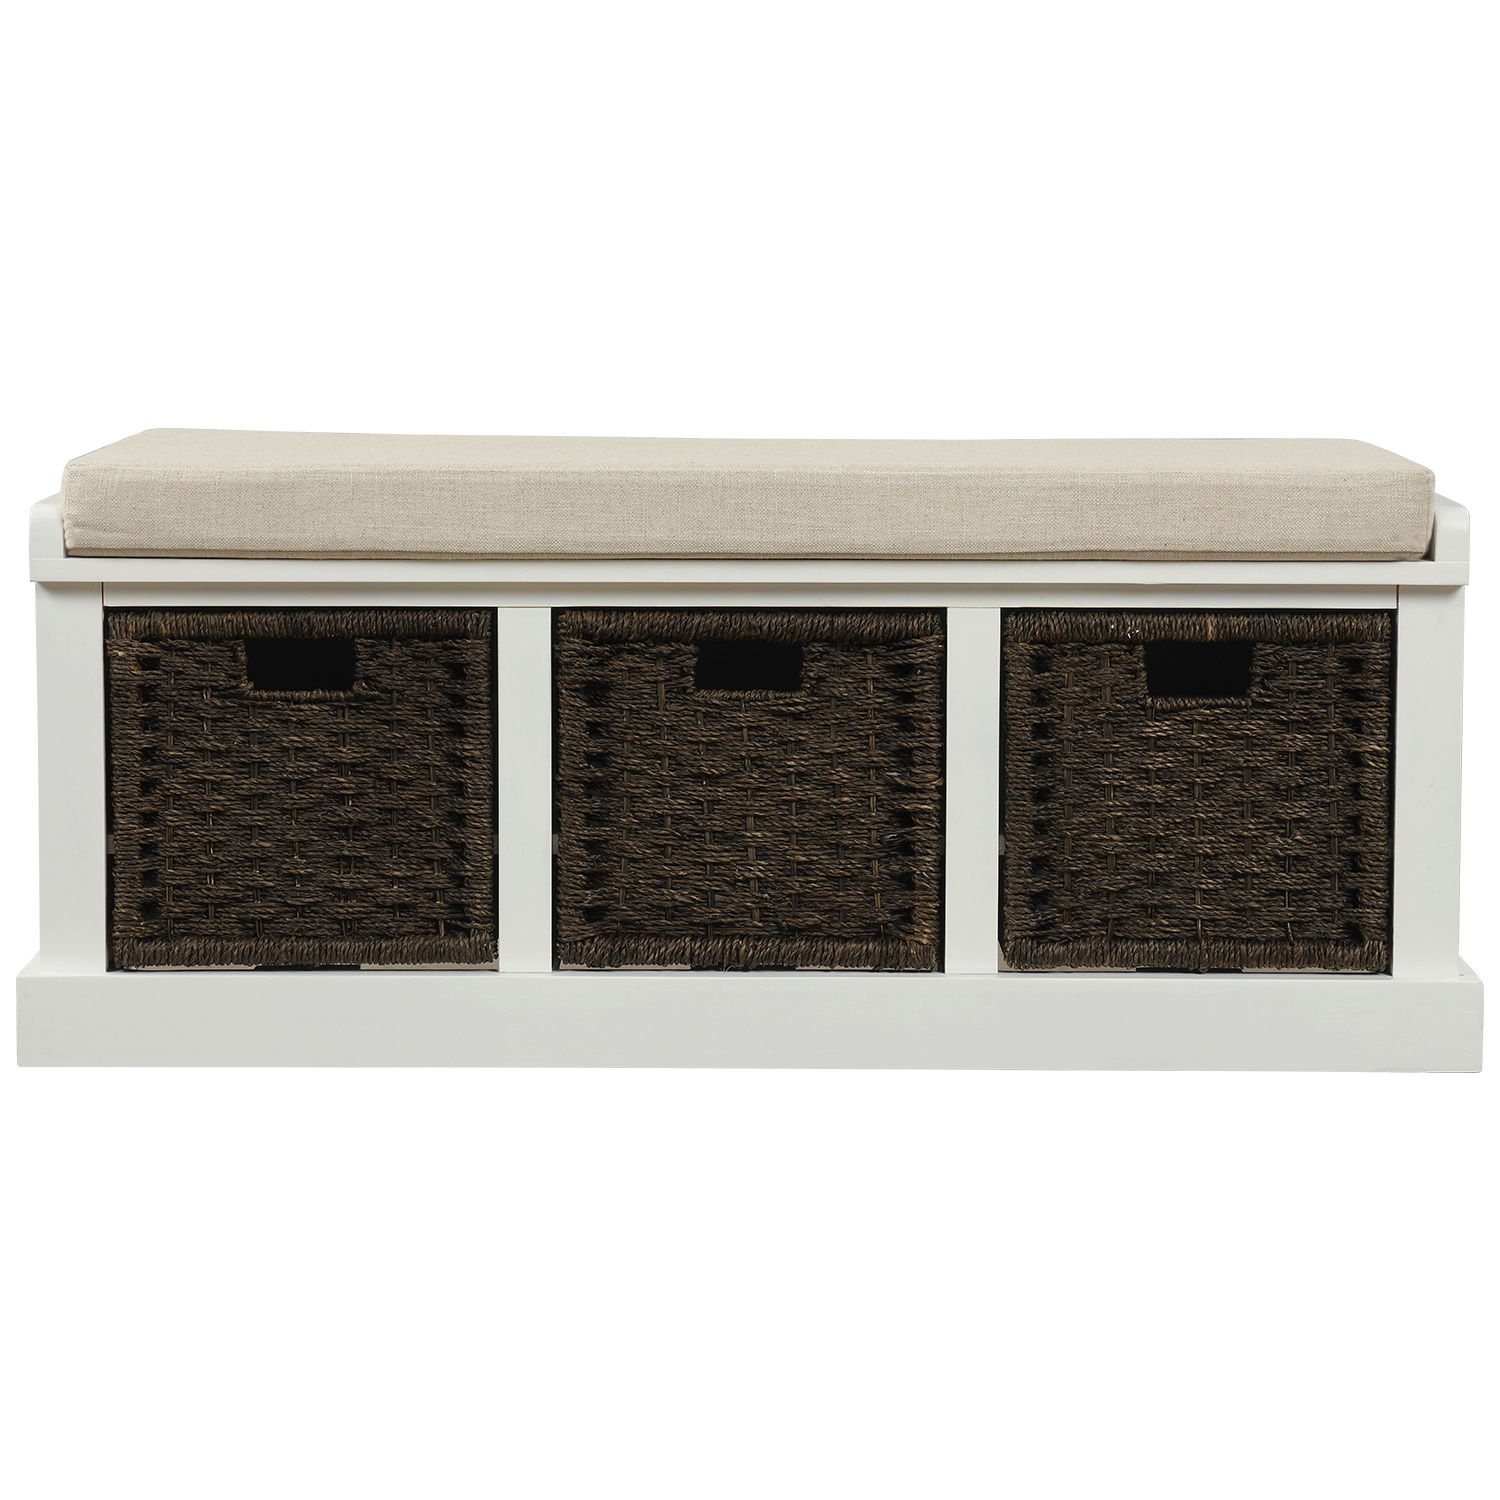 Rustic Storage Bench With 3 Removable Classic Rattan Basket